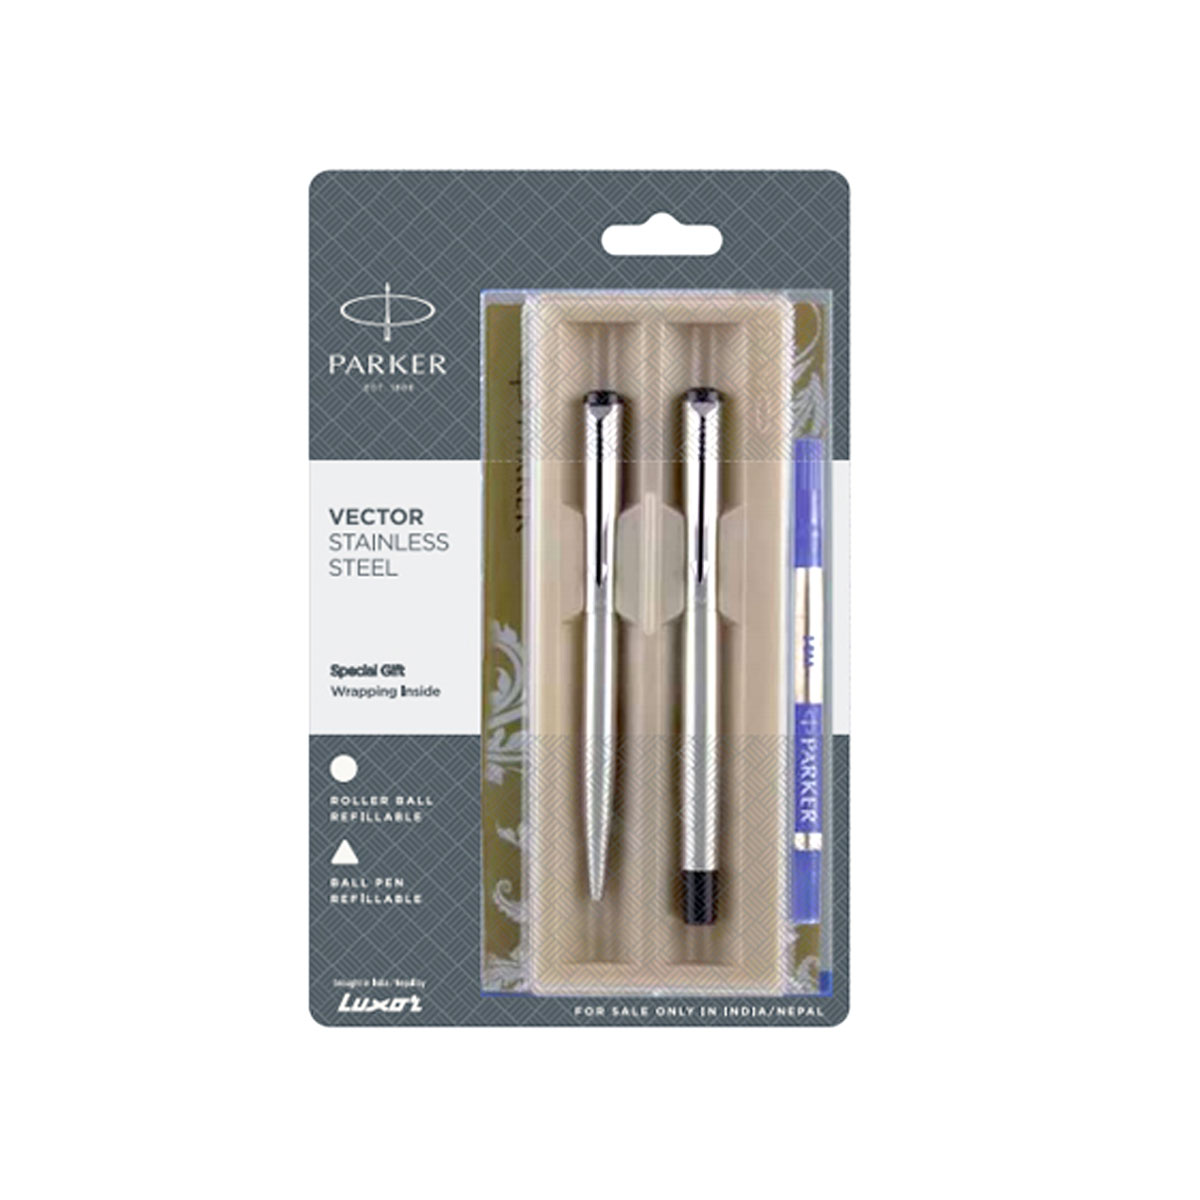 Parker Vector Stainless Steel Body Ultra Fine Roller Ball AndFine Tip Ball Pen With Silver Clip Set SKU 19934